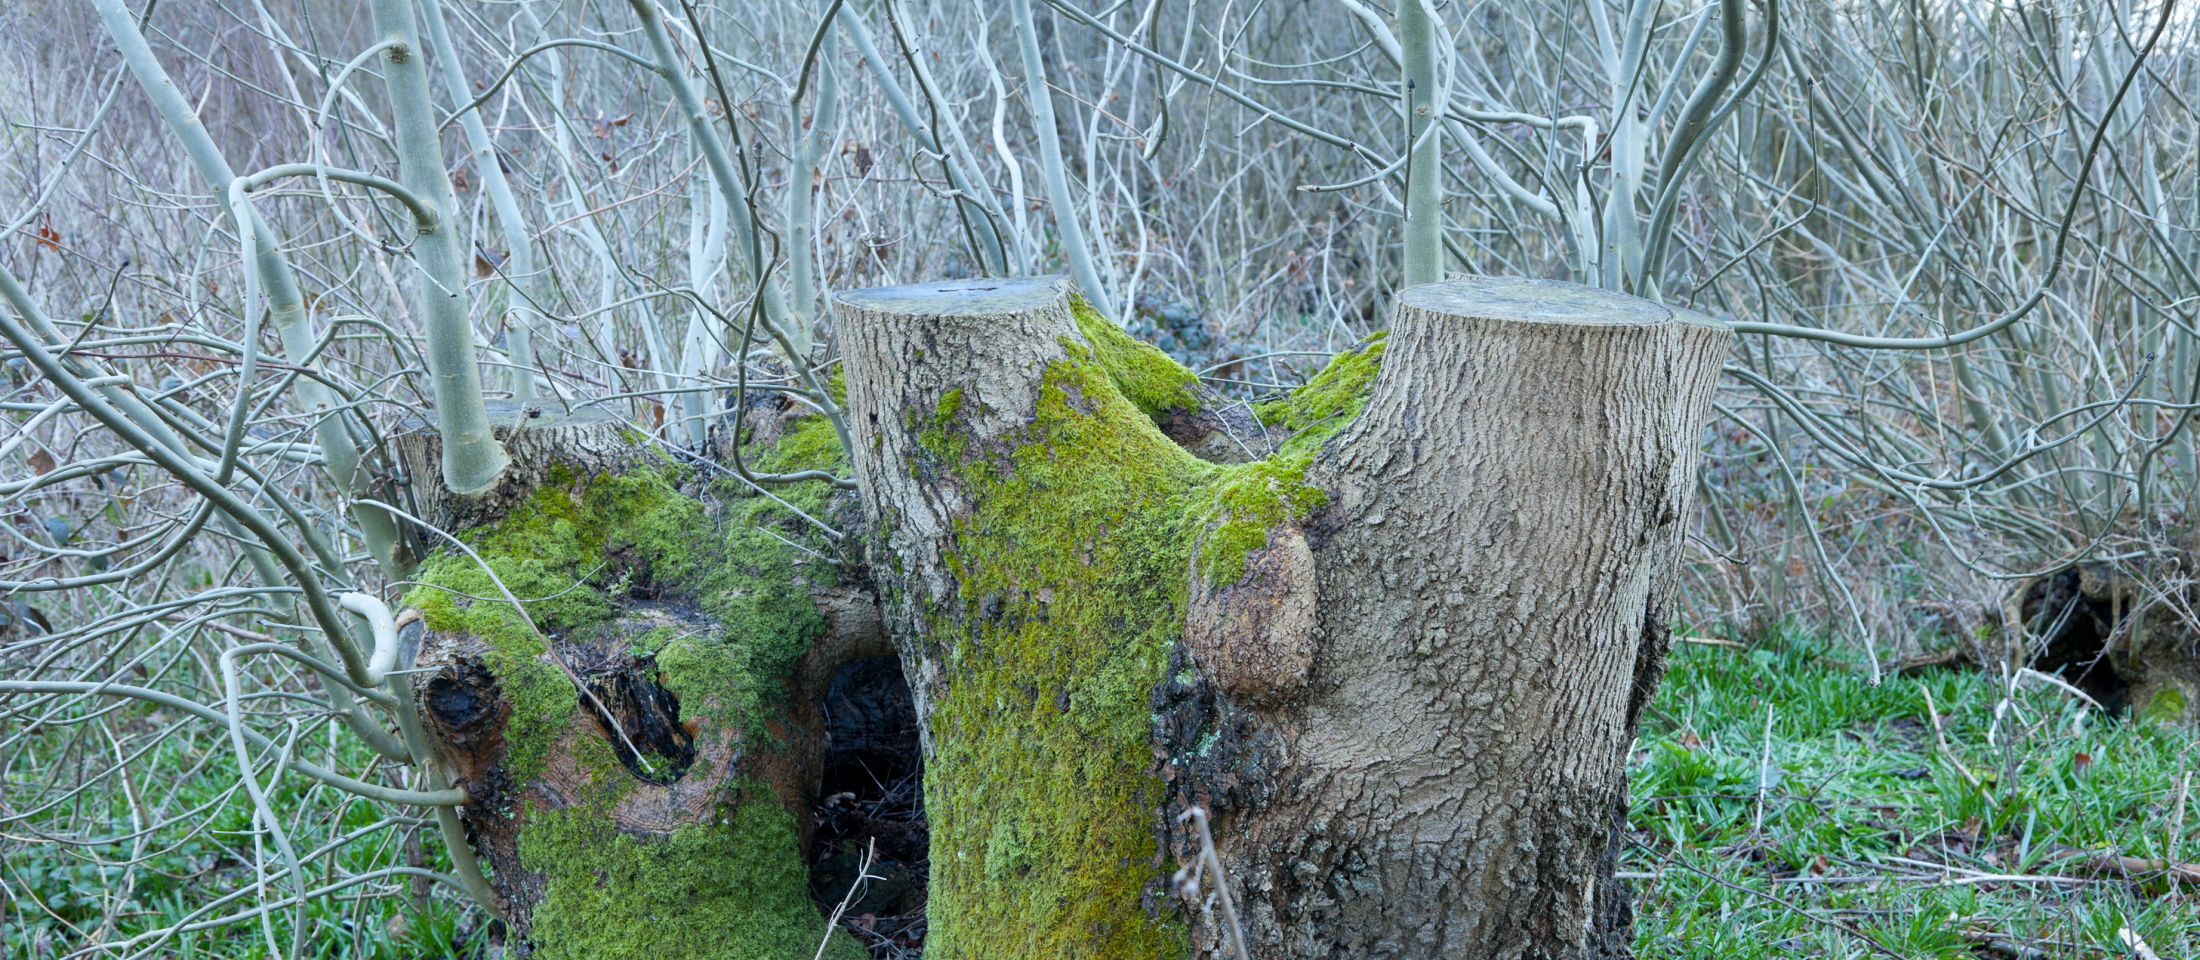 A coppiced ash stool, near Ightham Mote and Knole, Kent. Photo: John Miller.